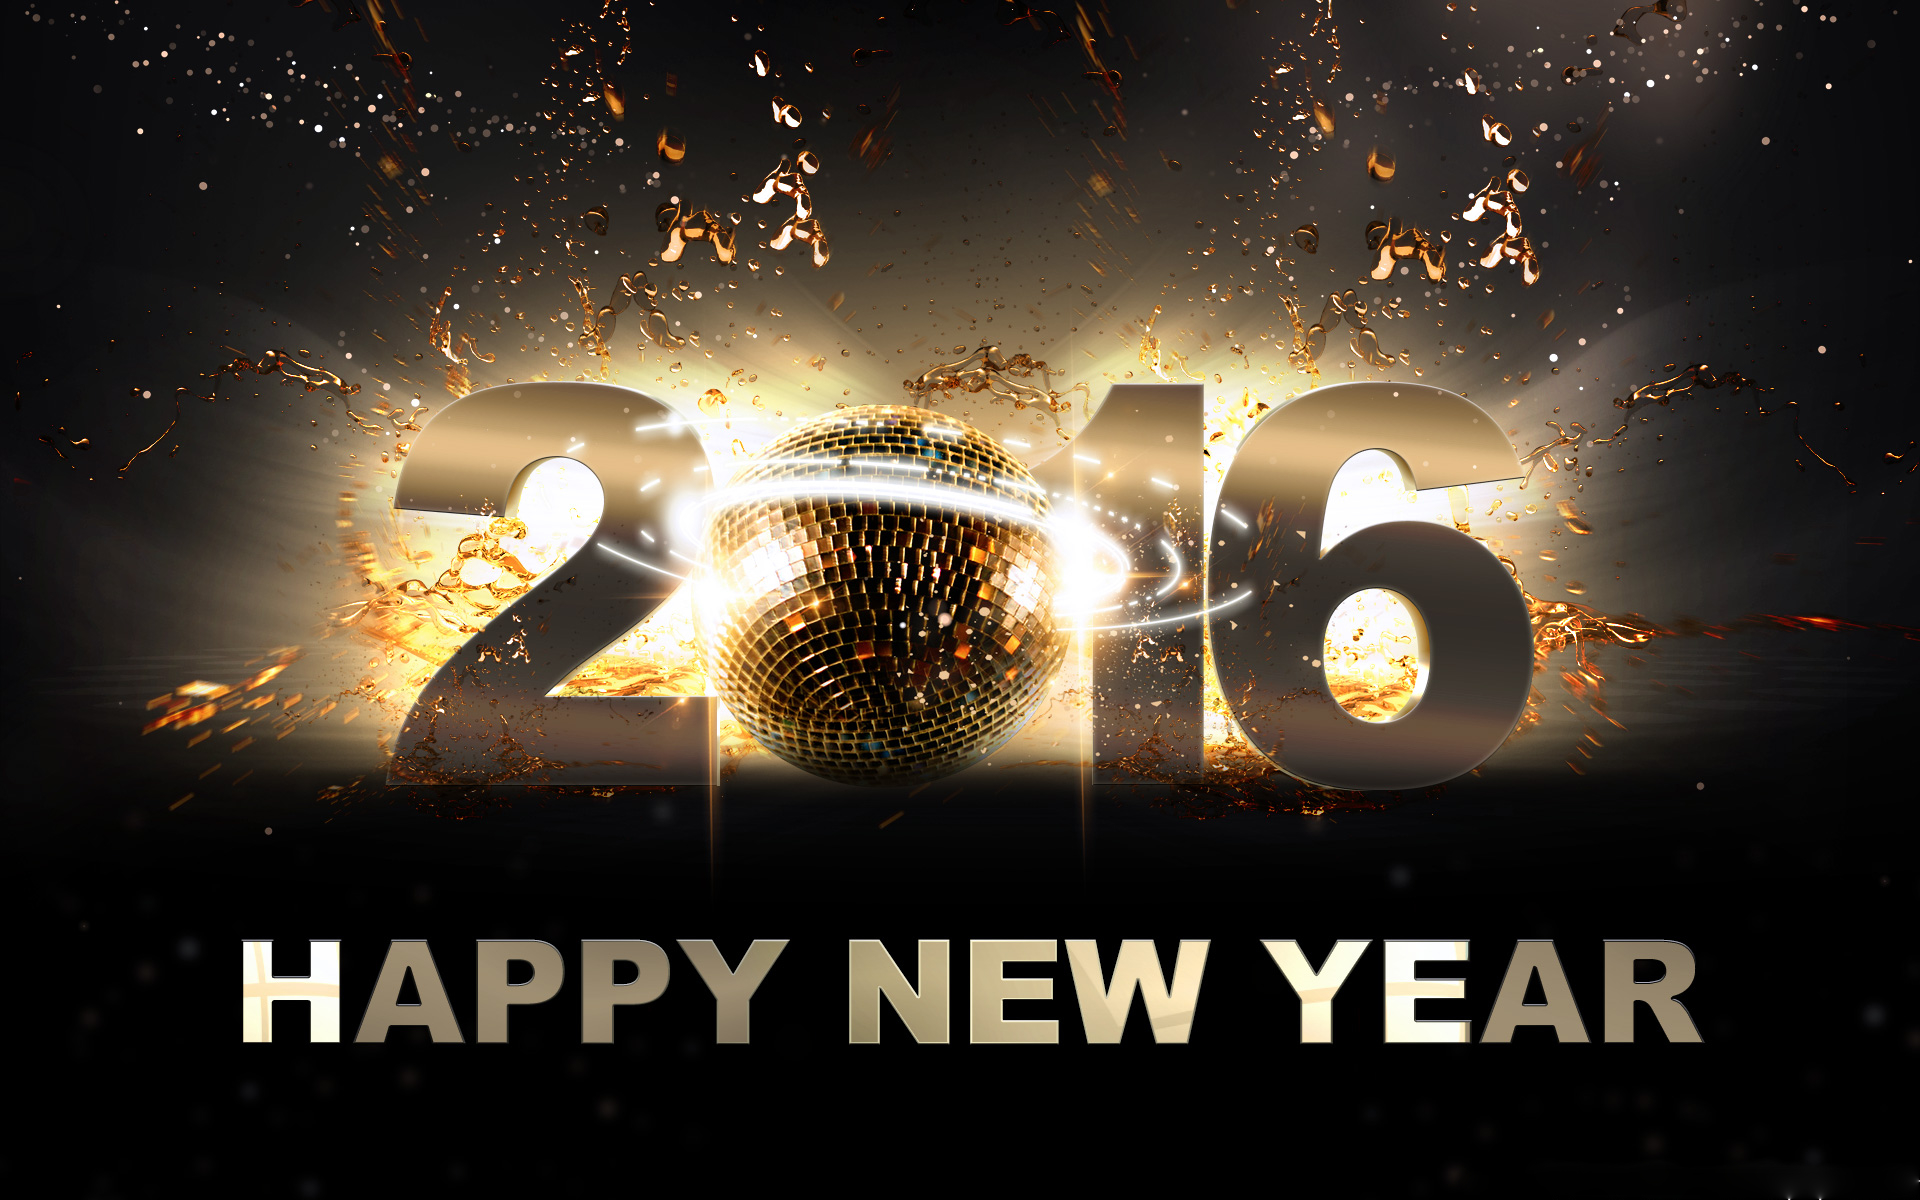 Happy New Years 2016 Wallpapers